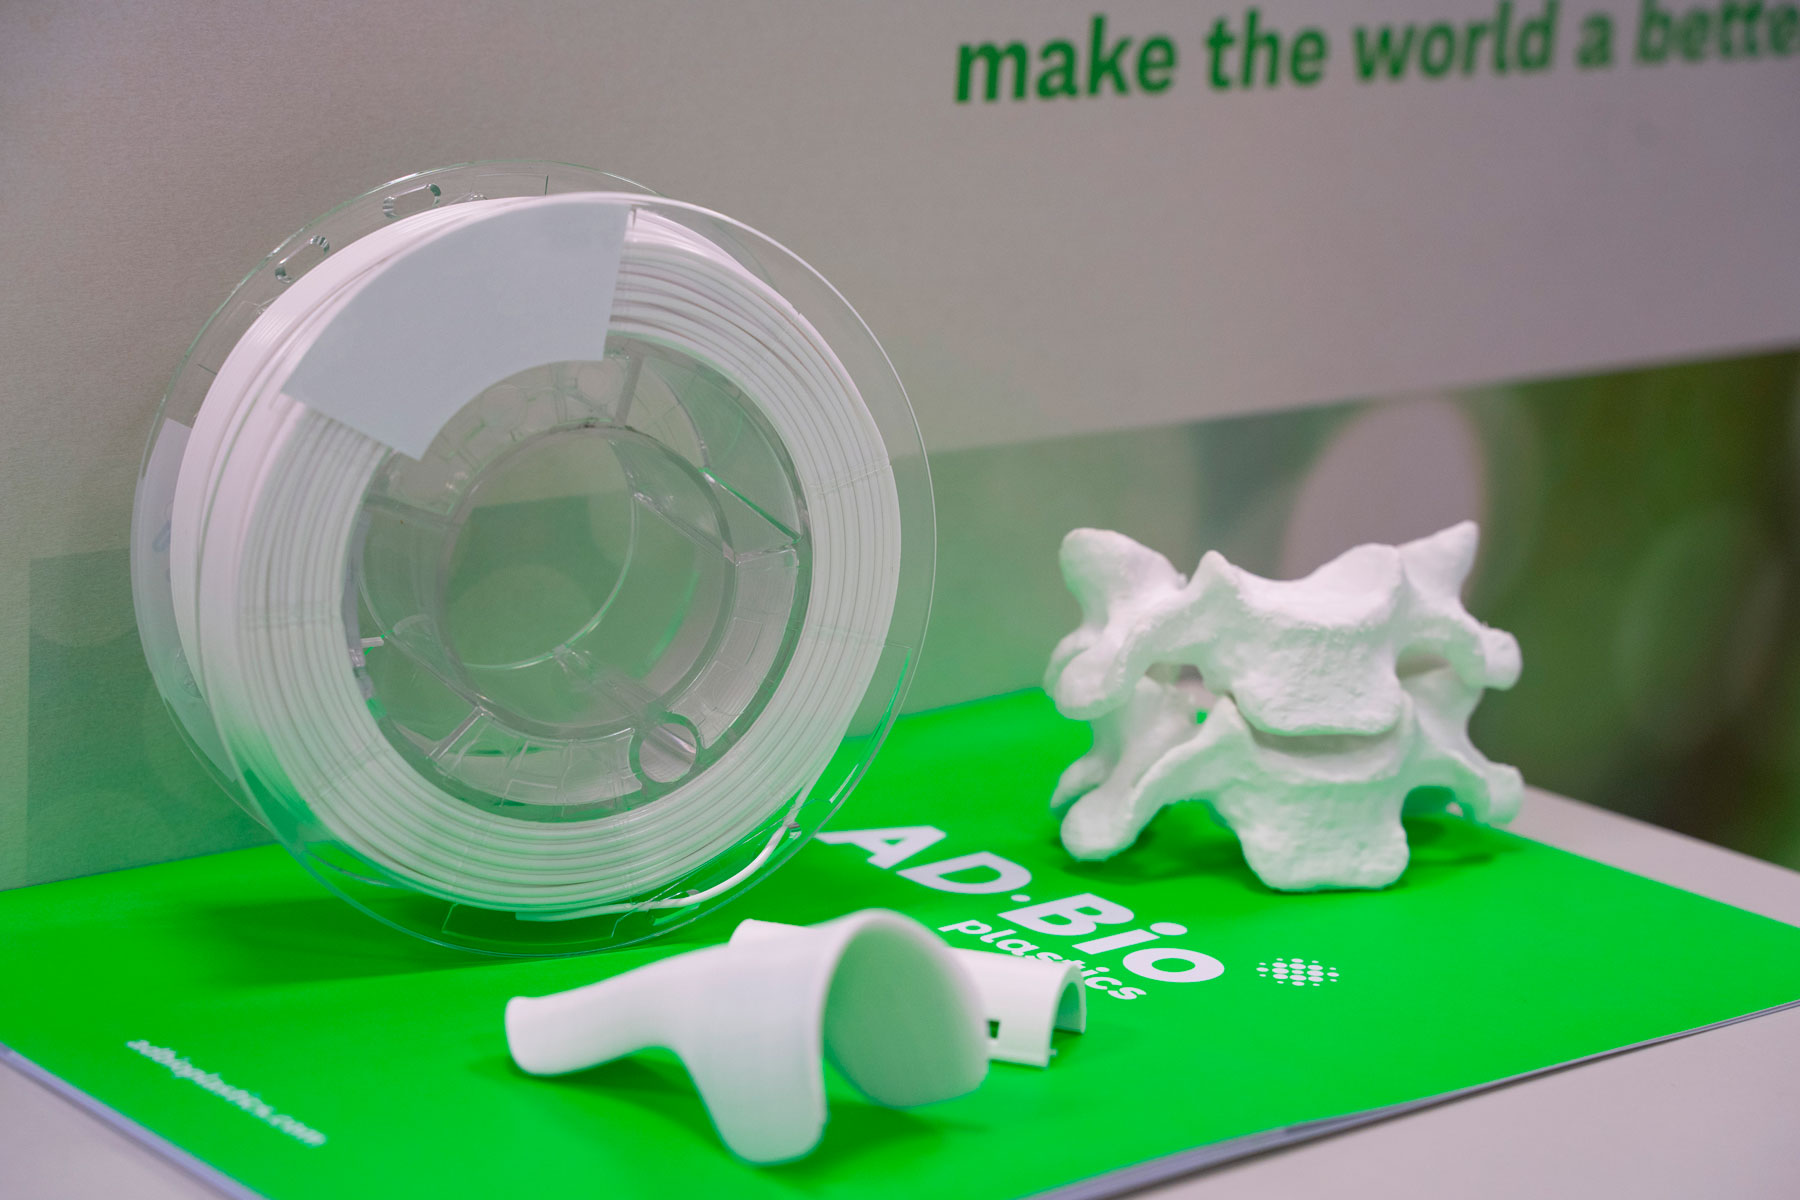 Products manufactured by ADBioplastics using 3D printing technology.